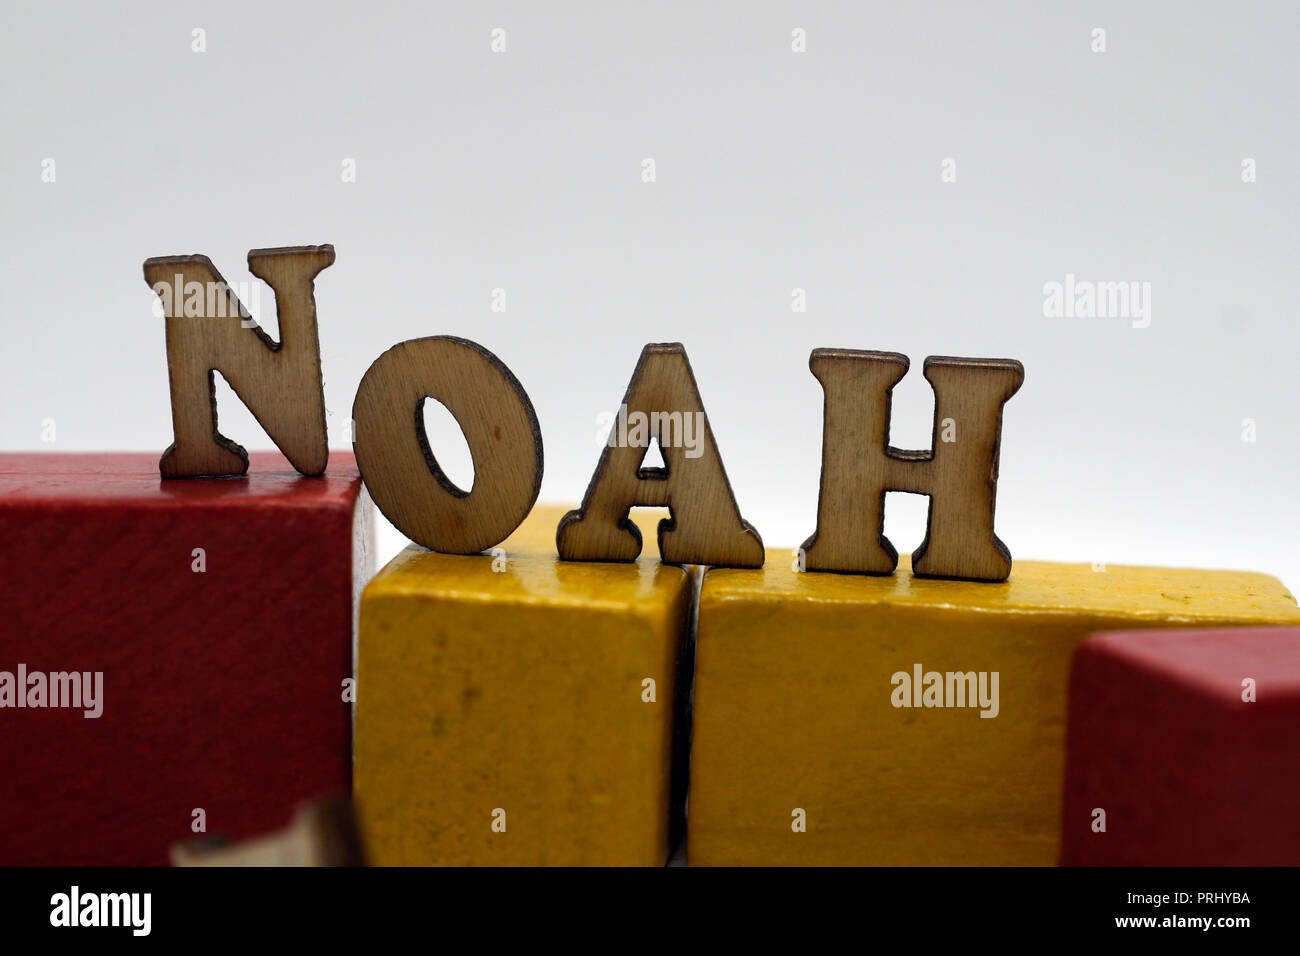 popular male first name noah Stock Photo